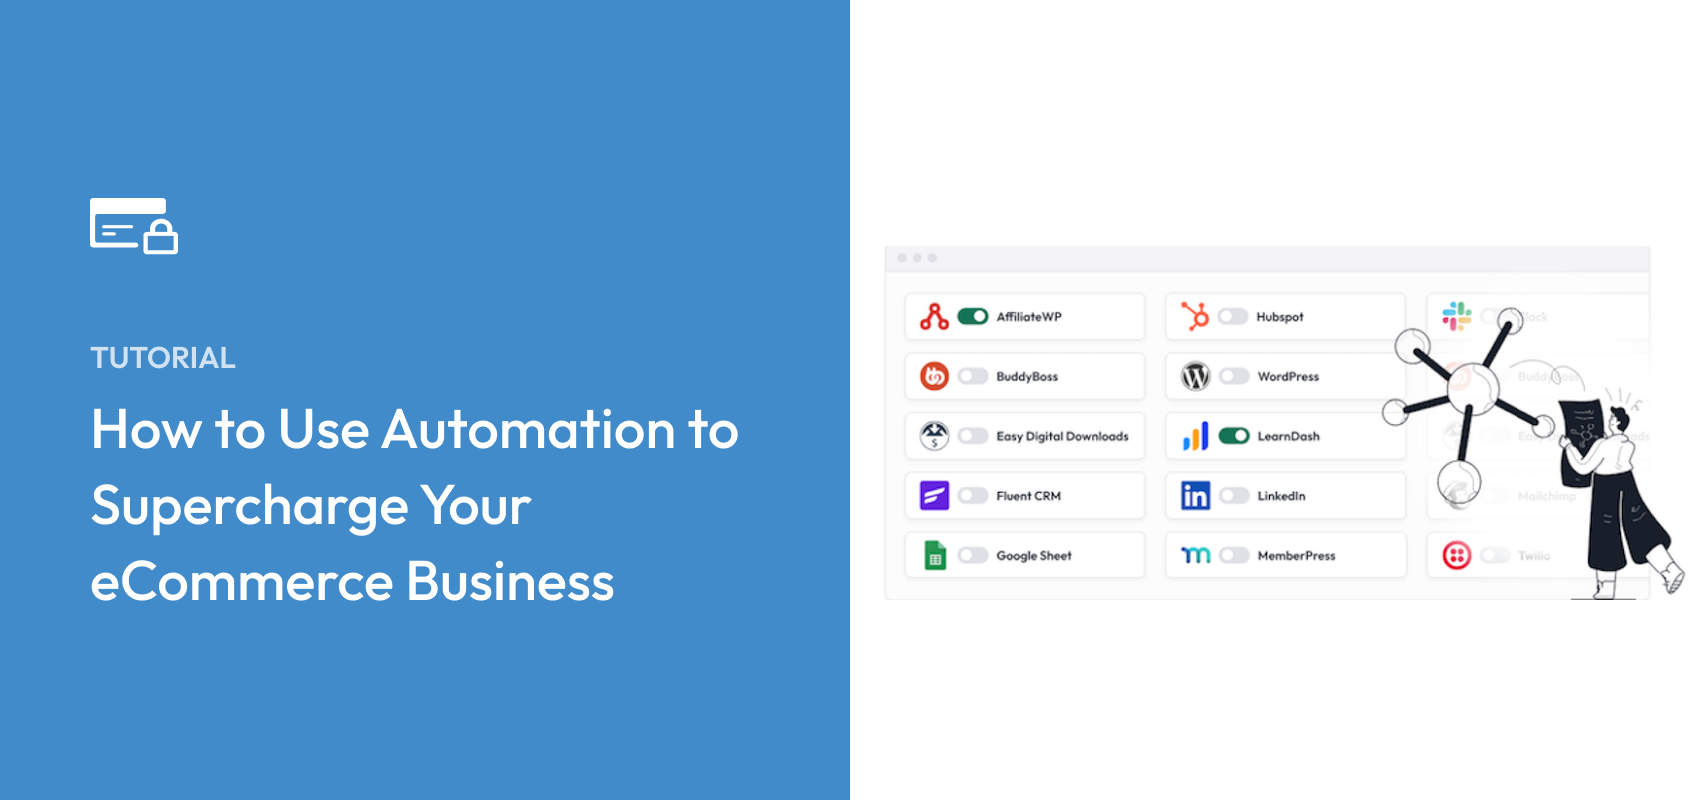 How to Use Automation to Supercharge Your eCommerce Business